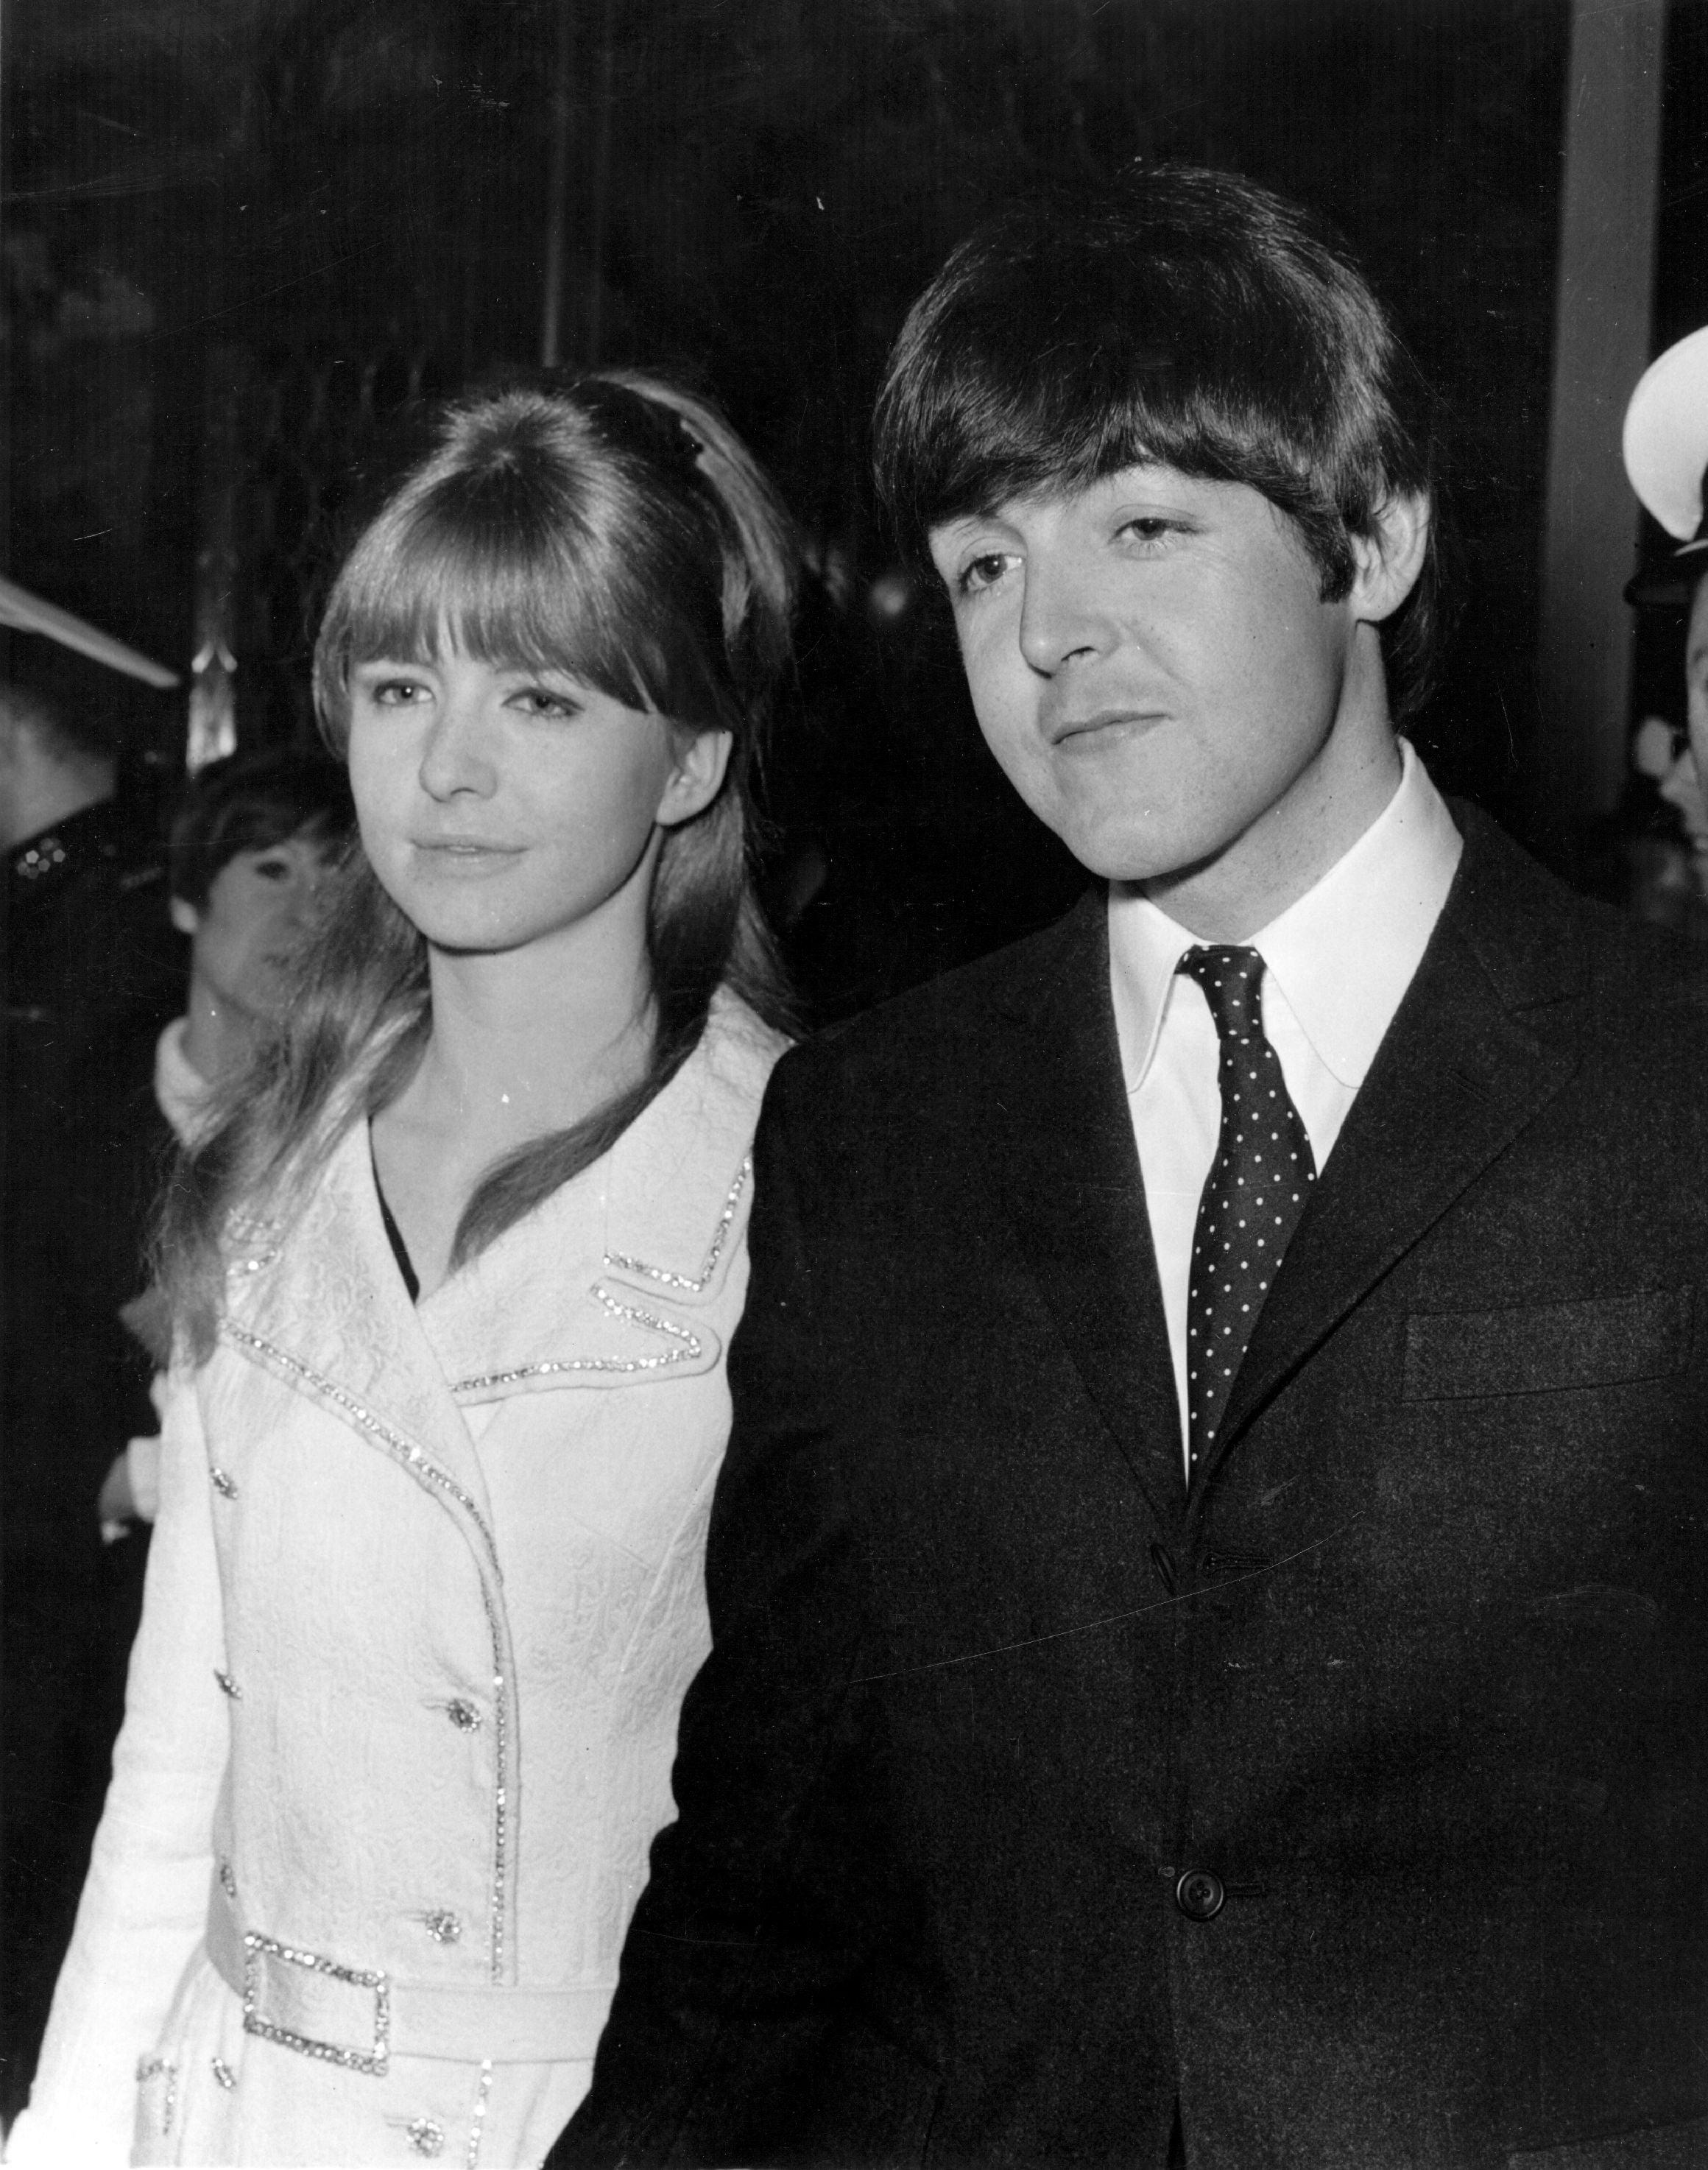 McCartney and Asher at the ‘Alfie’ premiere in 1966